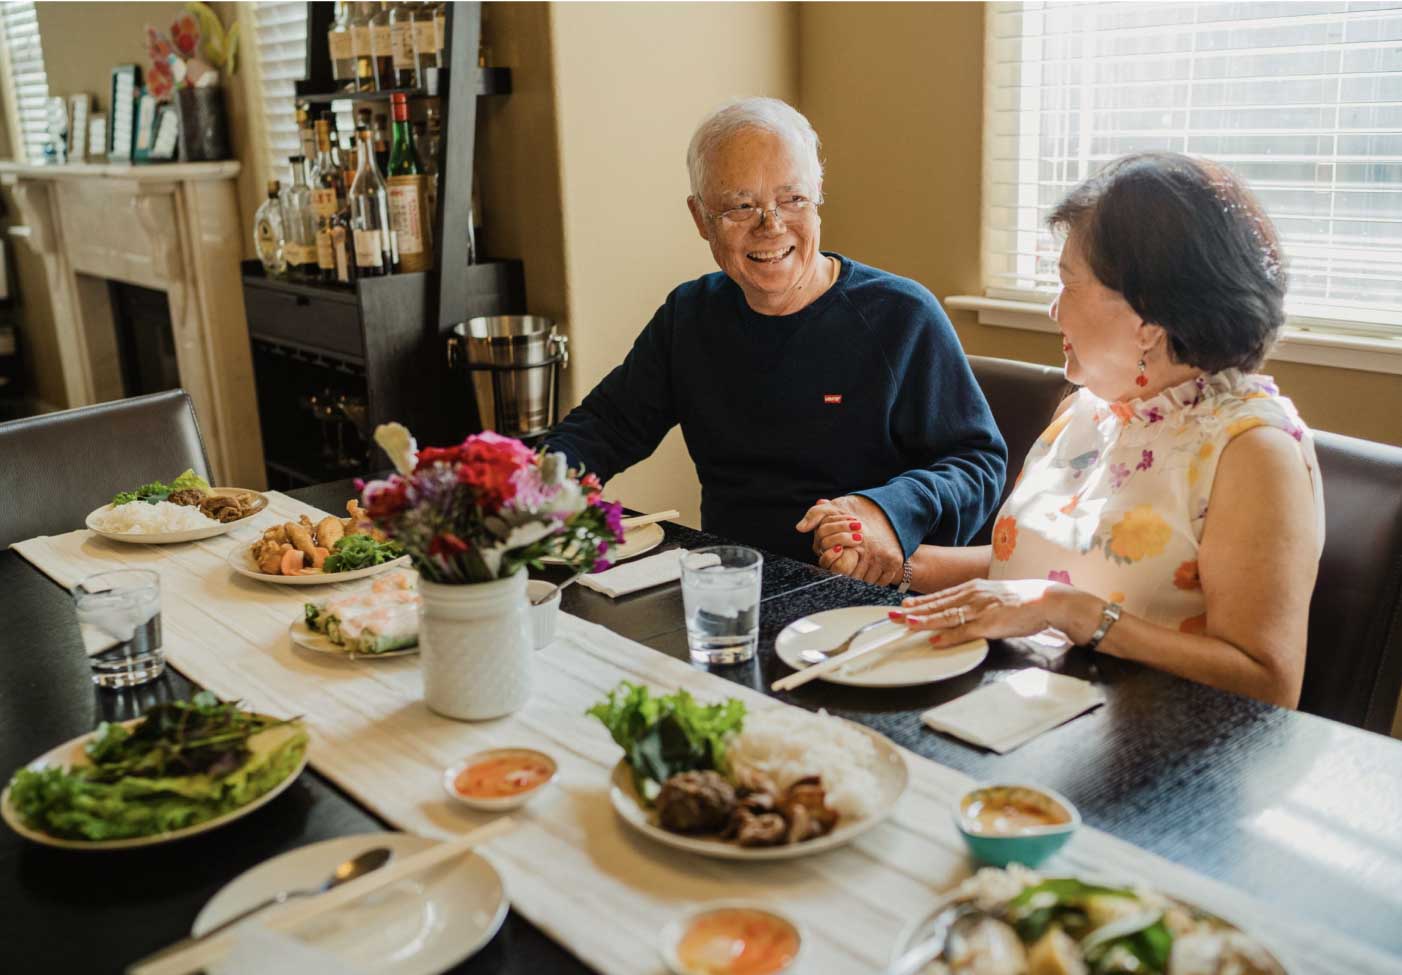 An elderly couple laughing and talking over a meal.